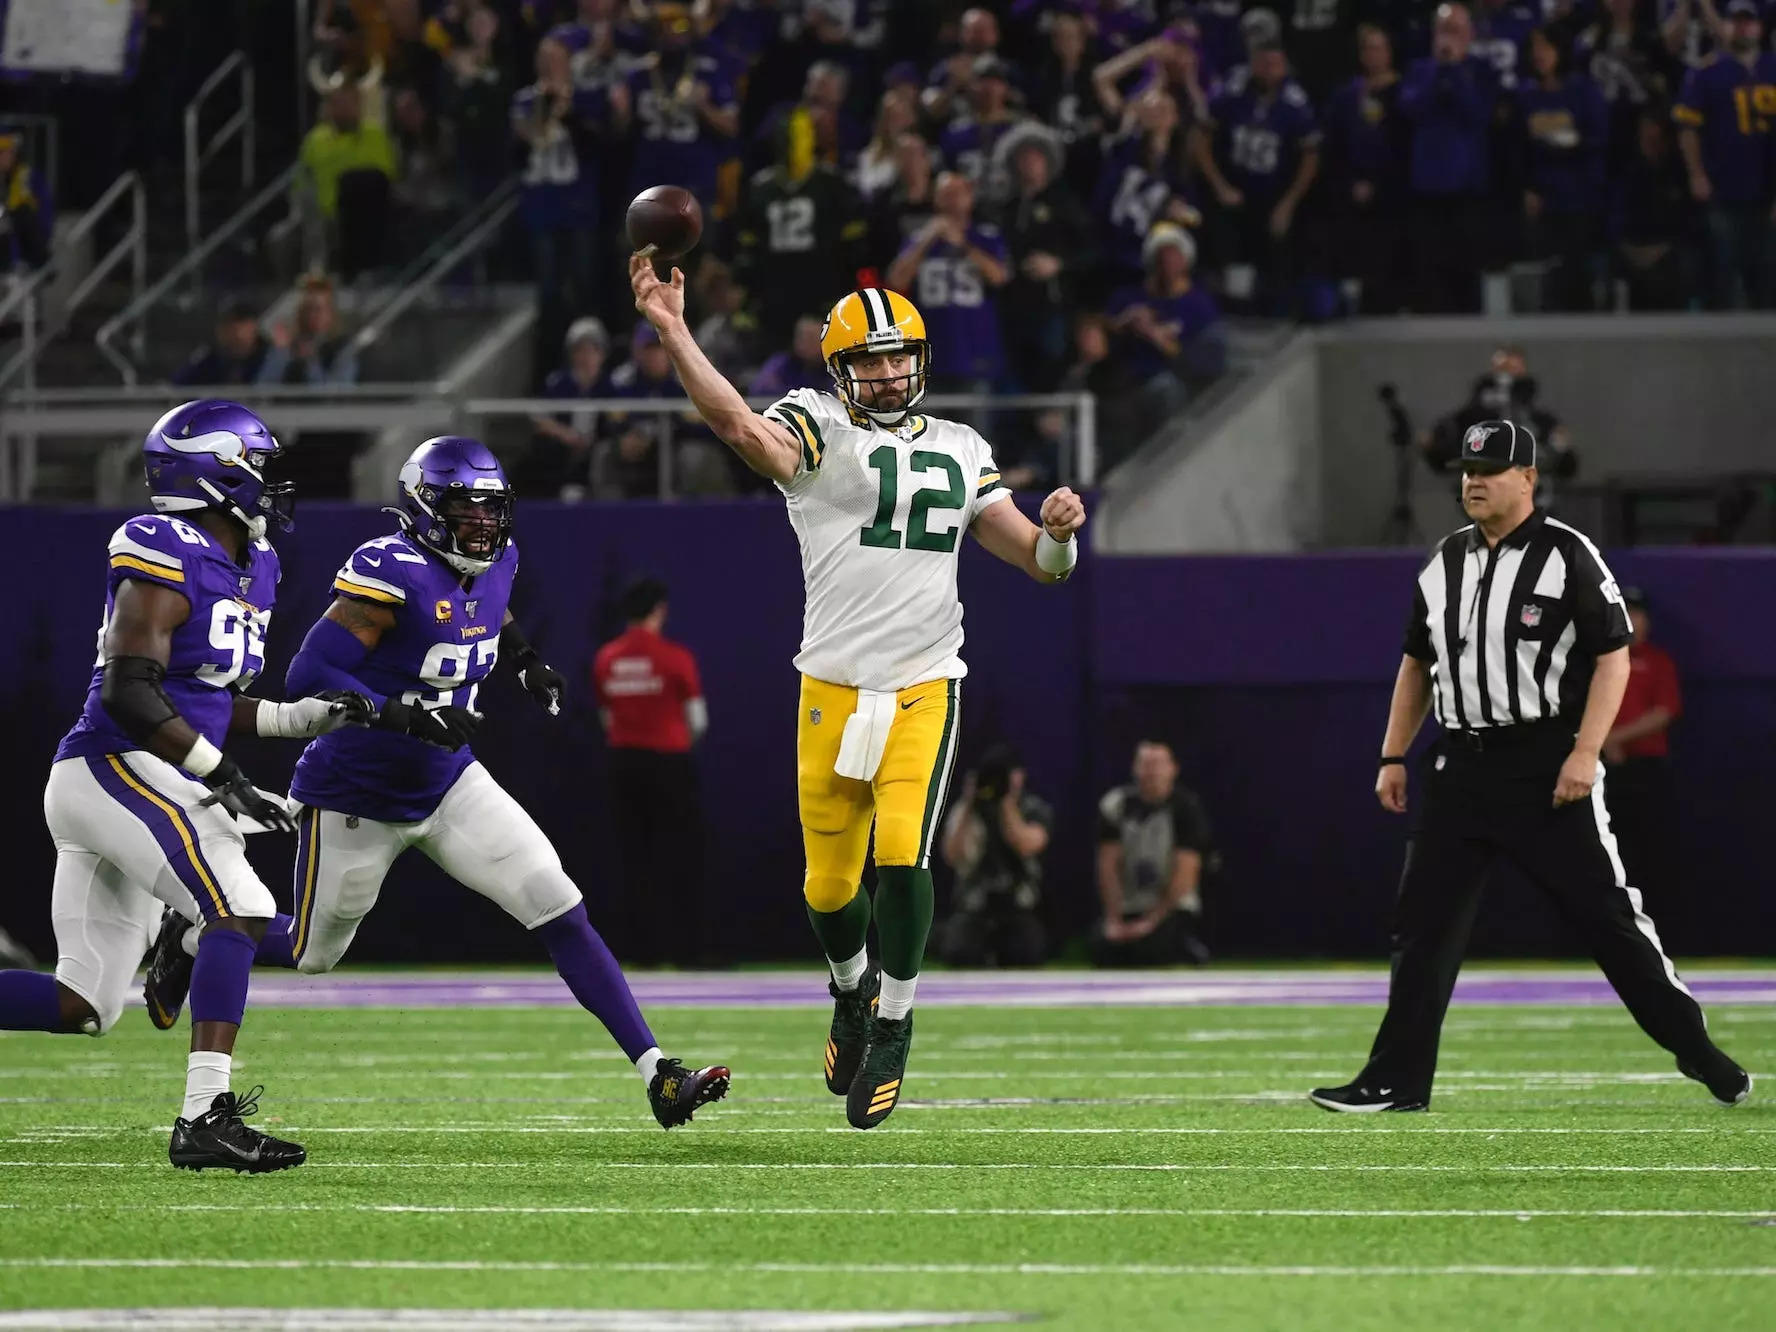 Aaron Rodgers makes a throw across his body while being chased by Vikings defenders.